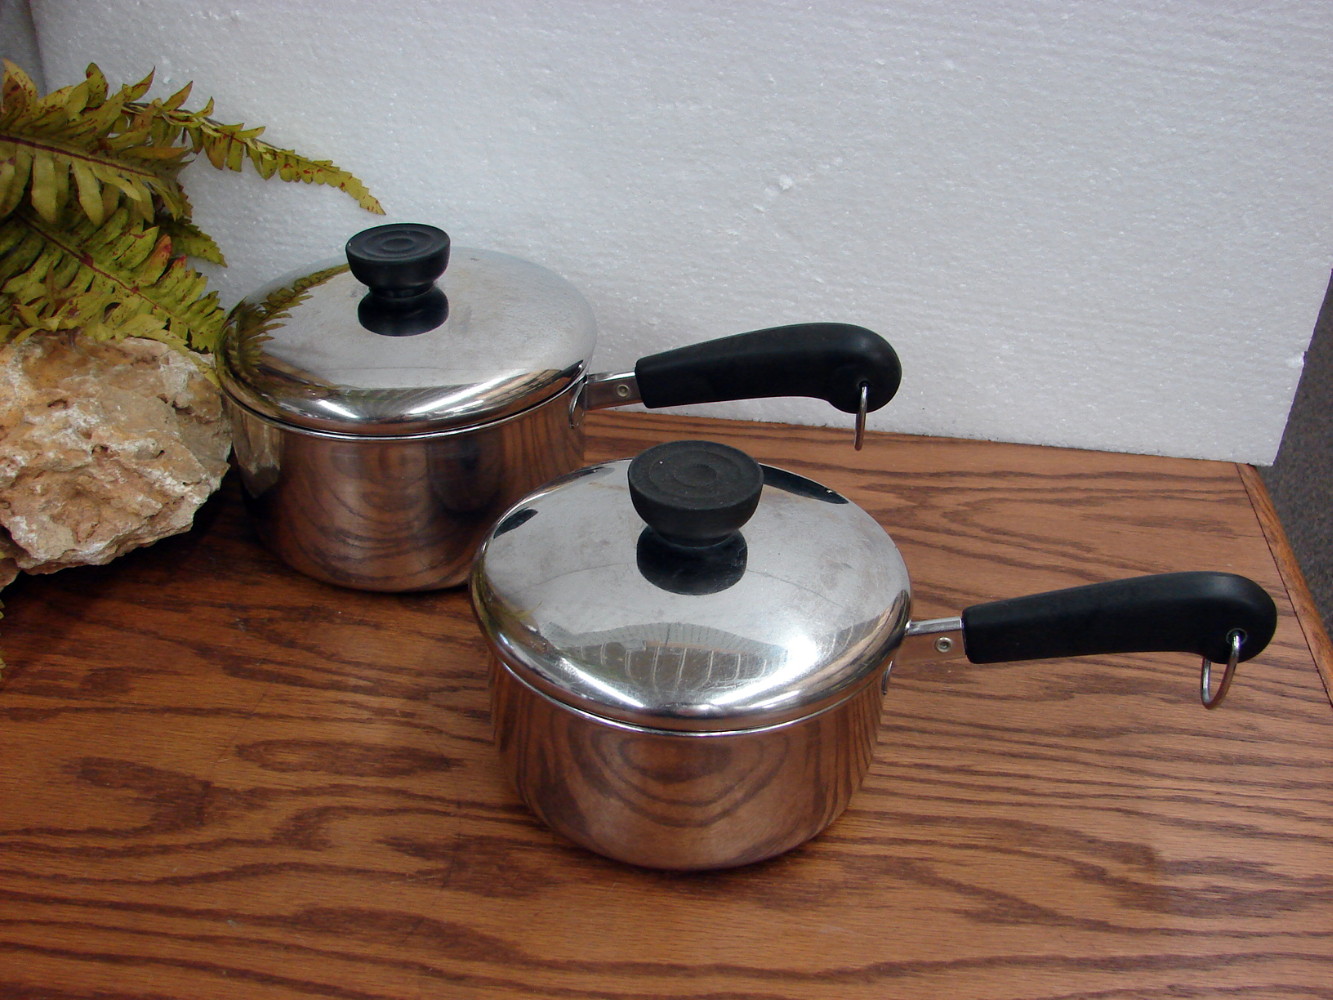 Revere 2-Qt. Stainless-Steel Covered Saucepan With Copper Bottom